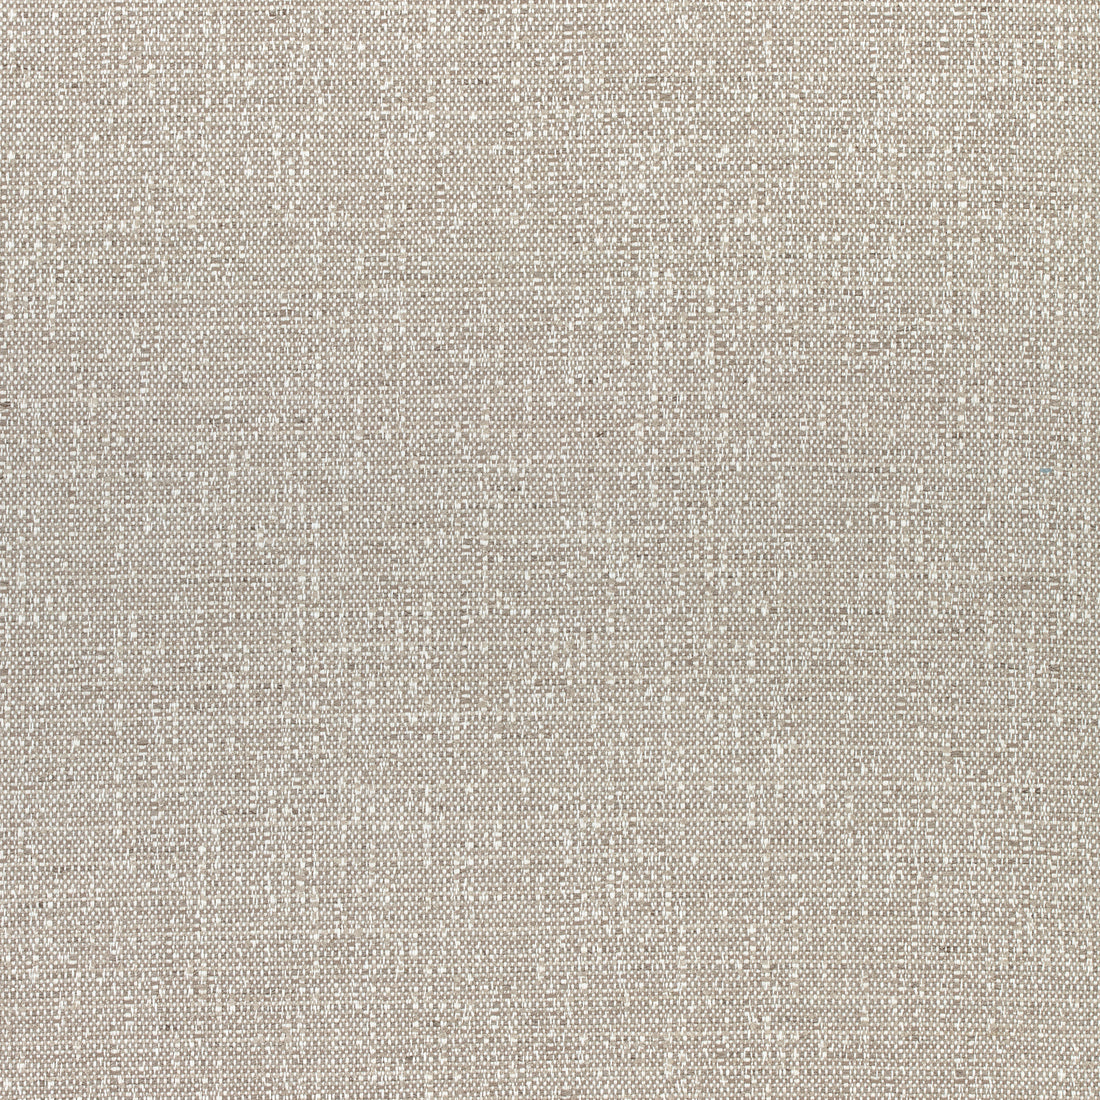 Everly fabric in stone color - pattern number W74057 - by Thibaut in the Cadence collection